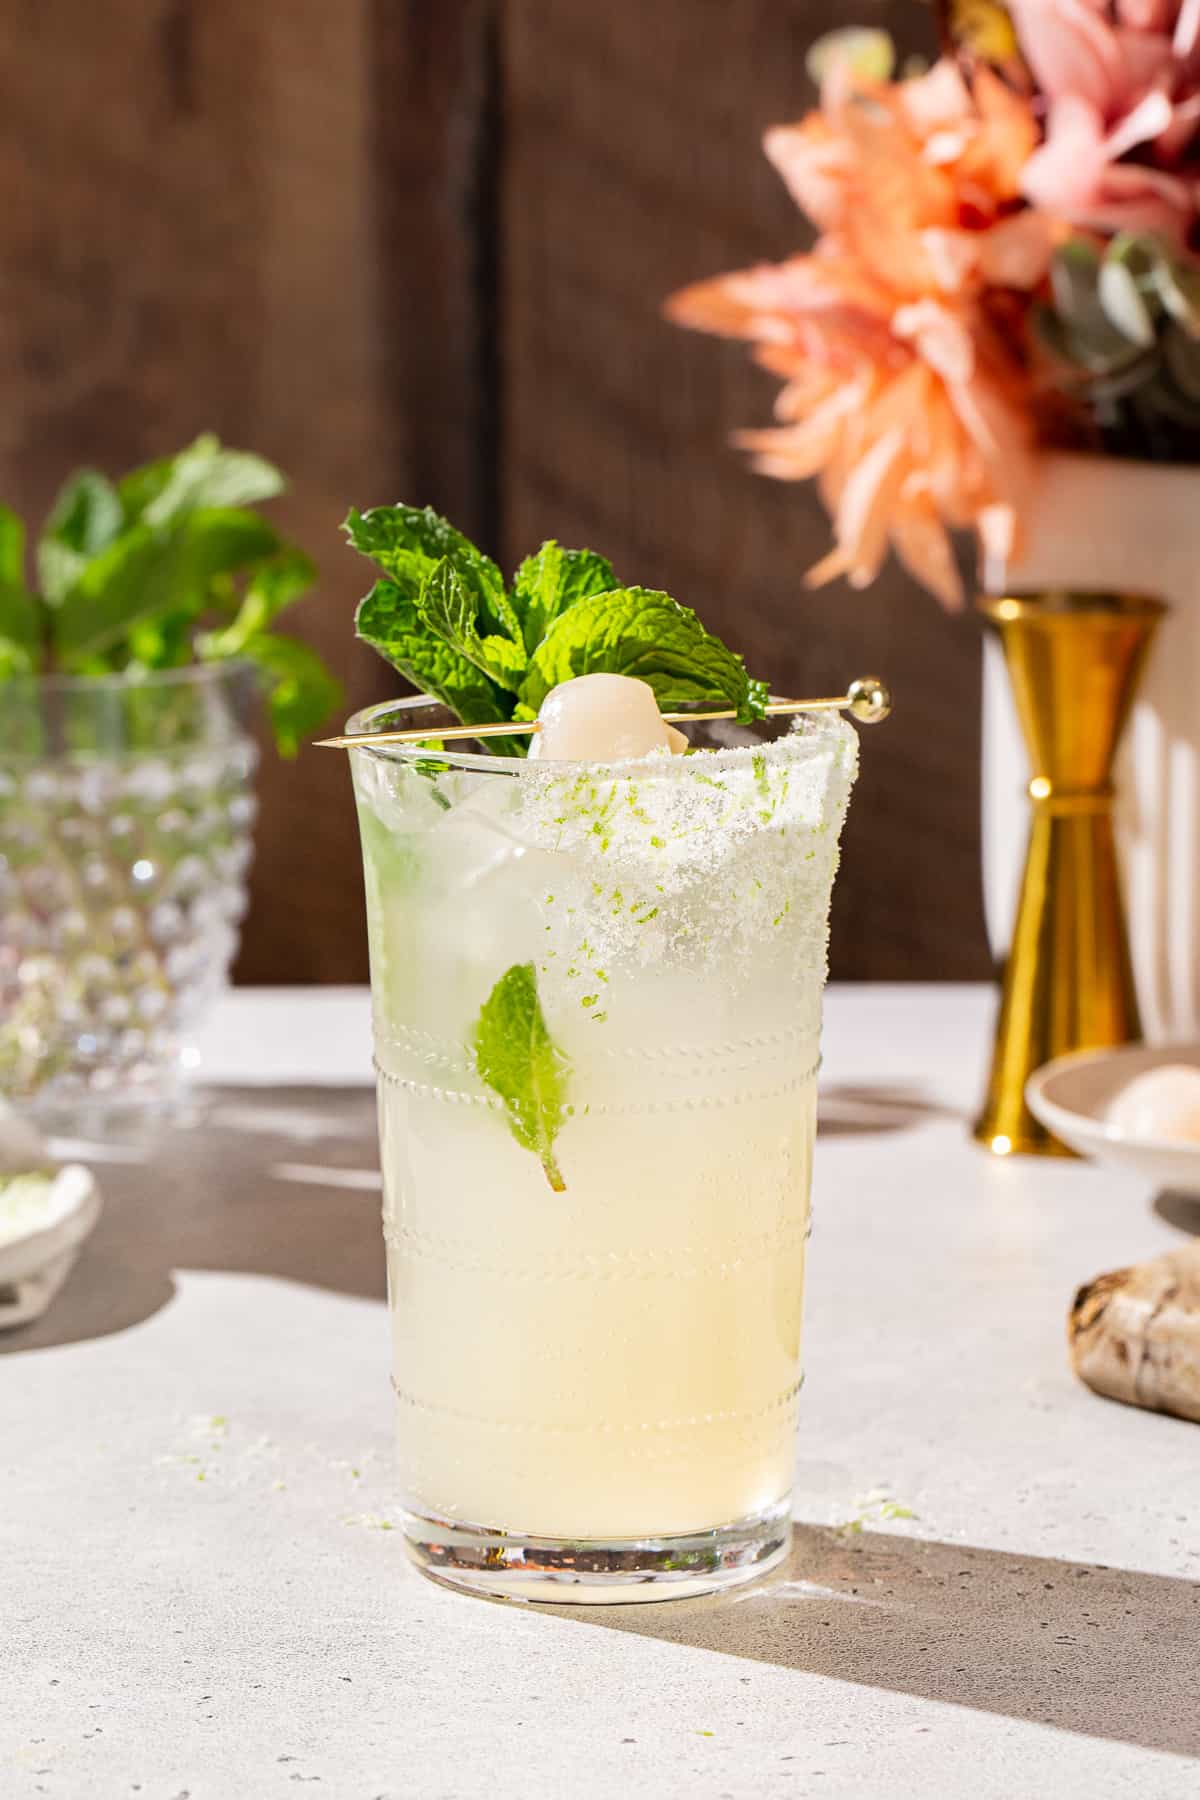 Side view of a Lychee mocktail garnished with mint and a lychee along with lime zest sugar on the side of the glass. In the background are flowers, a jigger, a dish of lychees and fresh mint.